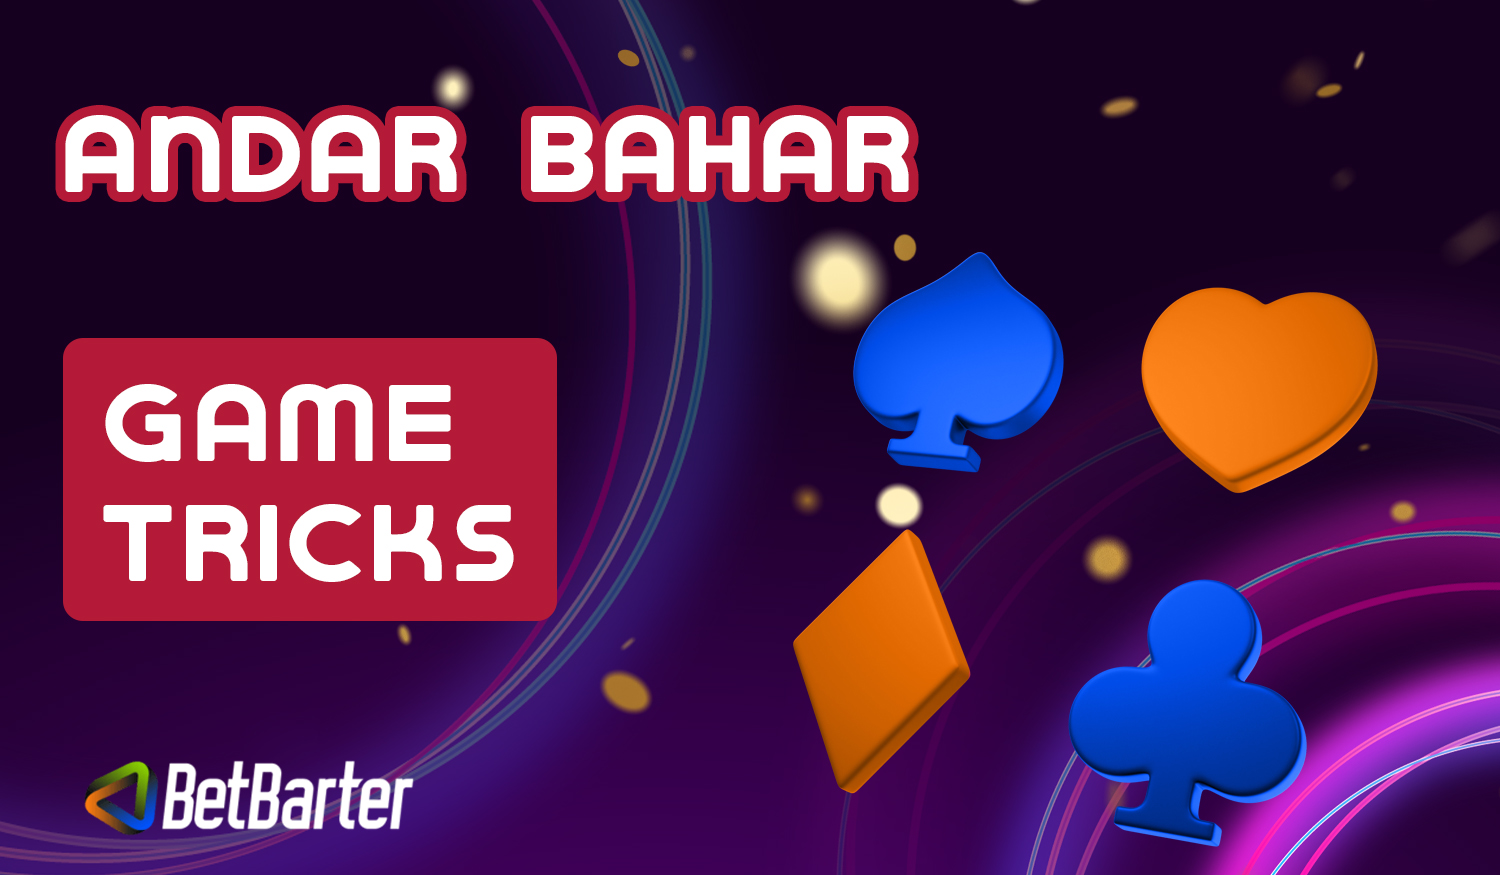 How to successfully play Andar Bahar on BetBarter: useful tips